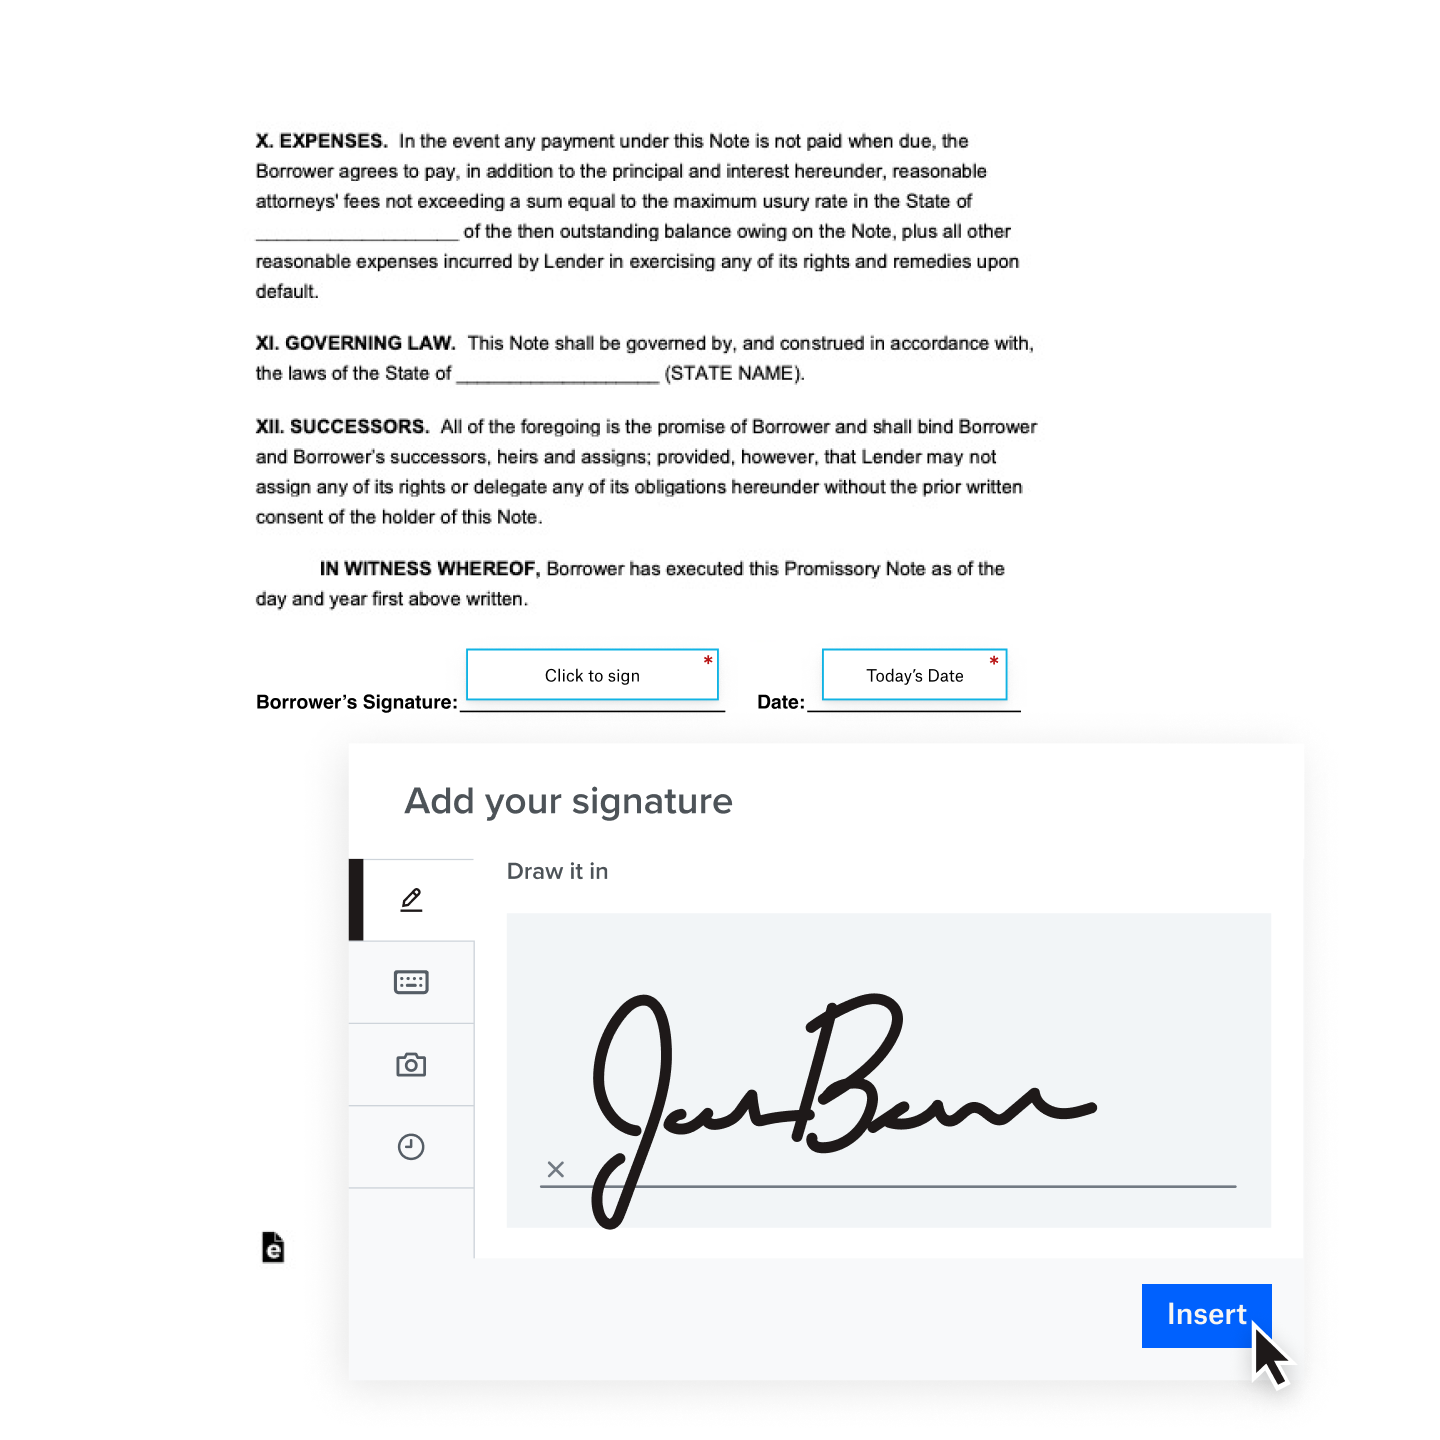 A handwritten digital signature being added to a contract